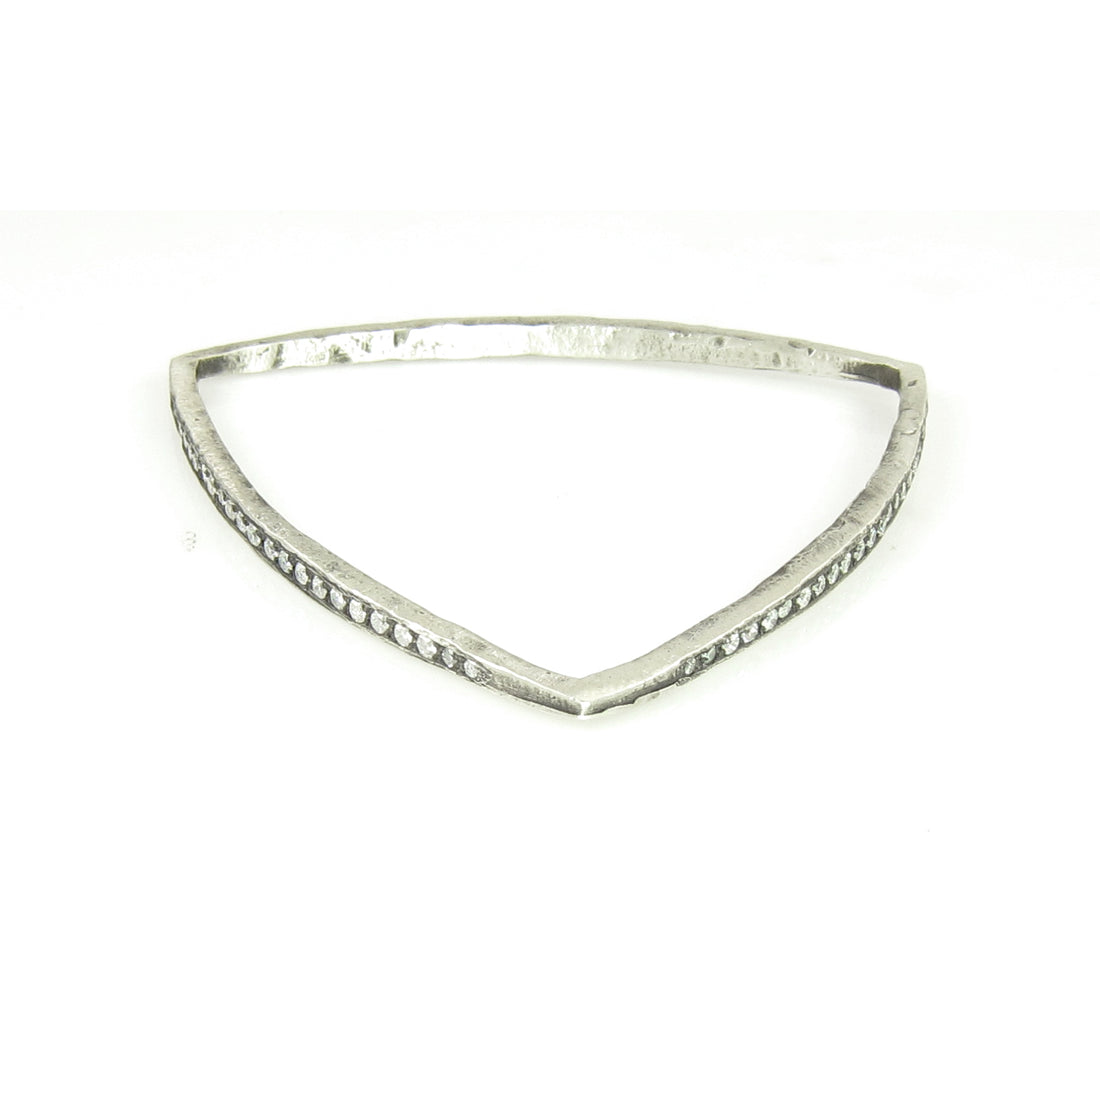 A diamond bangle in the shape of a triangle makes a unique, whimsical statement.